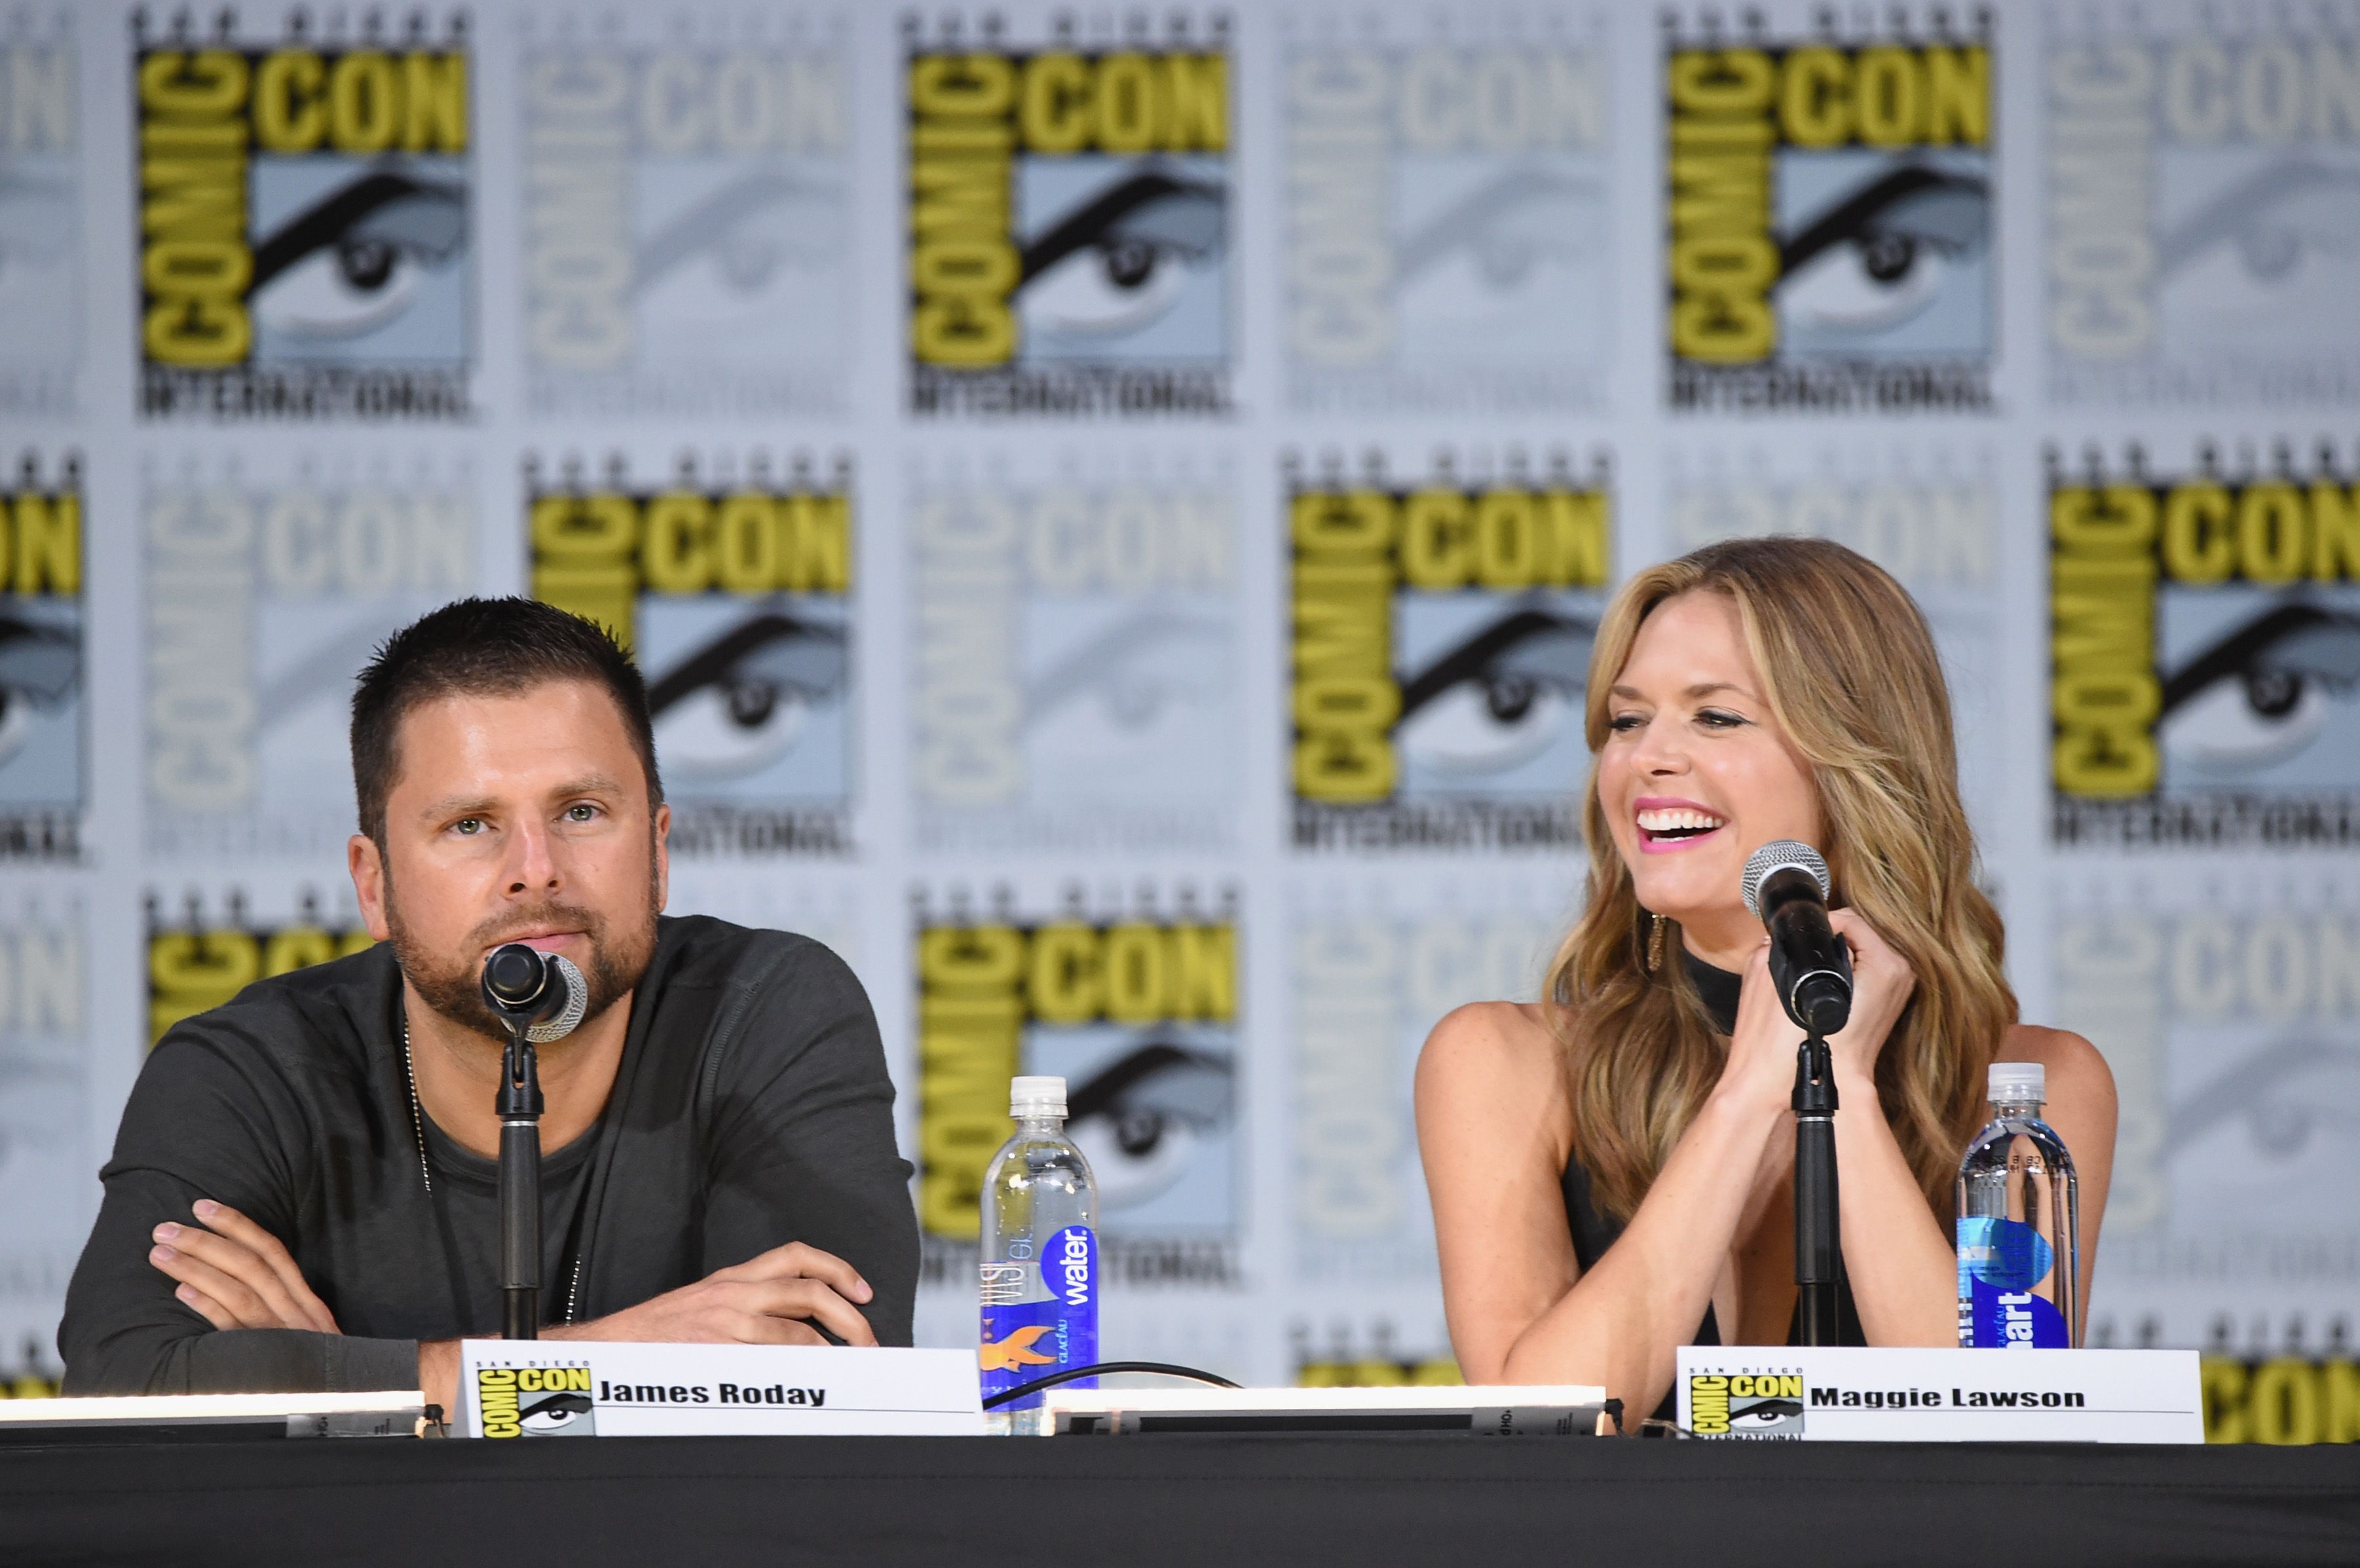 James Roday and Maggie Lawson during Comic-Con International 2017 at San Diego Convention Center on July 21, 2017, in San Diego, California. | Source: Getty Images